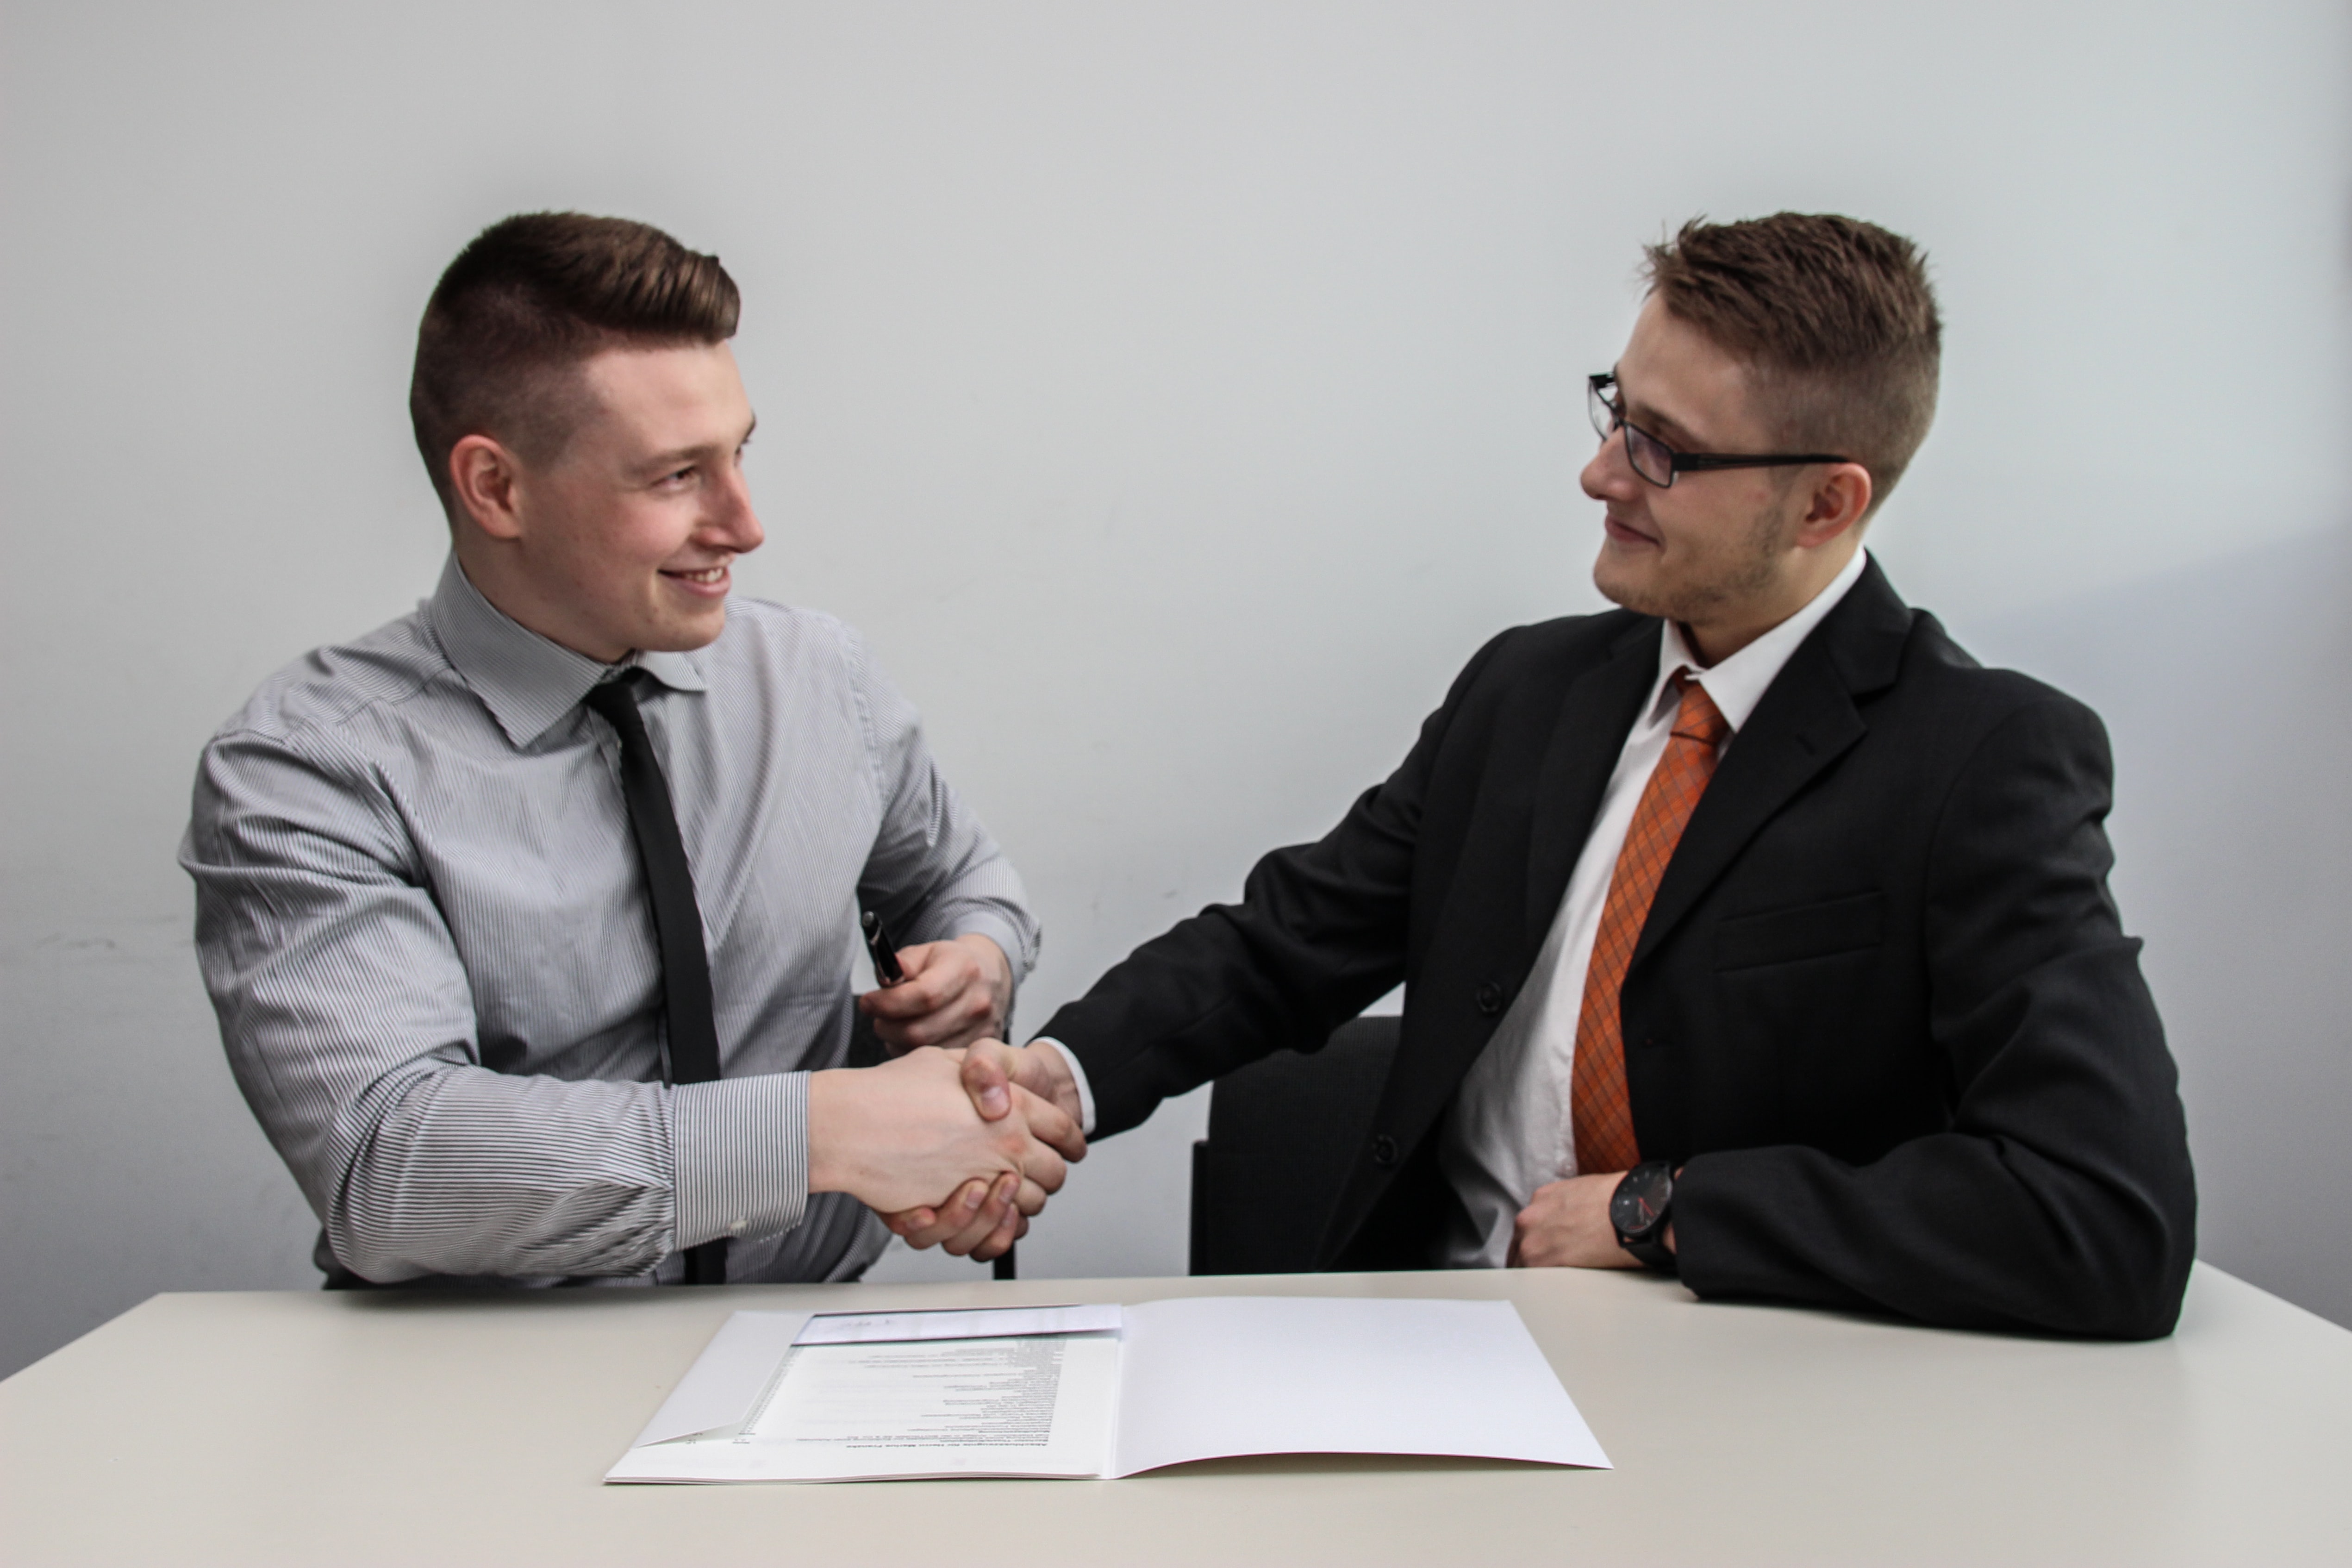 Contract agreement deal